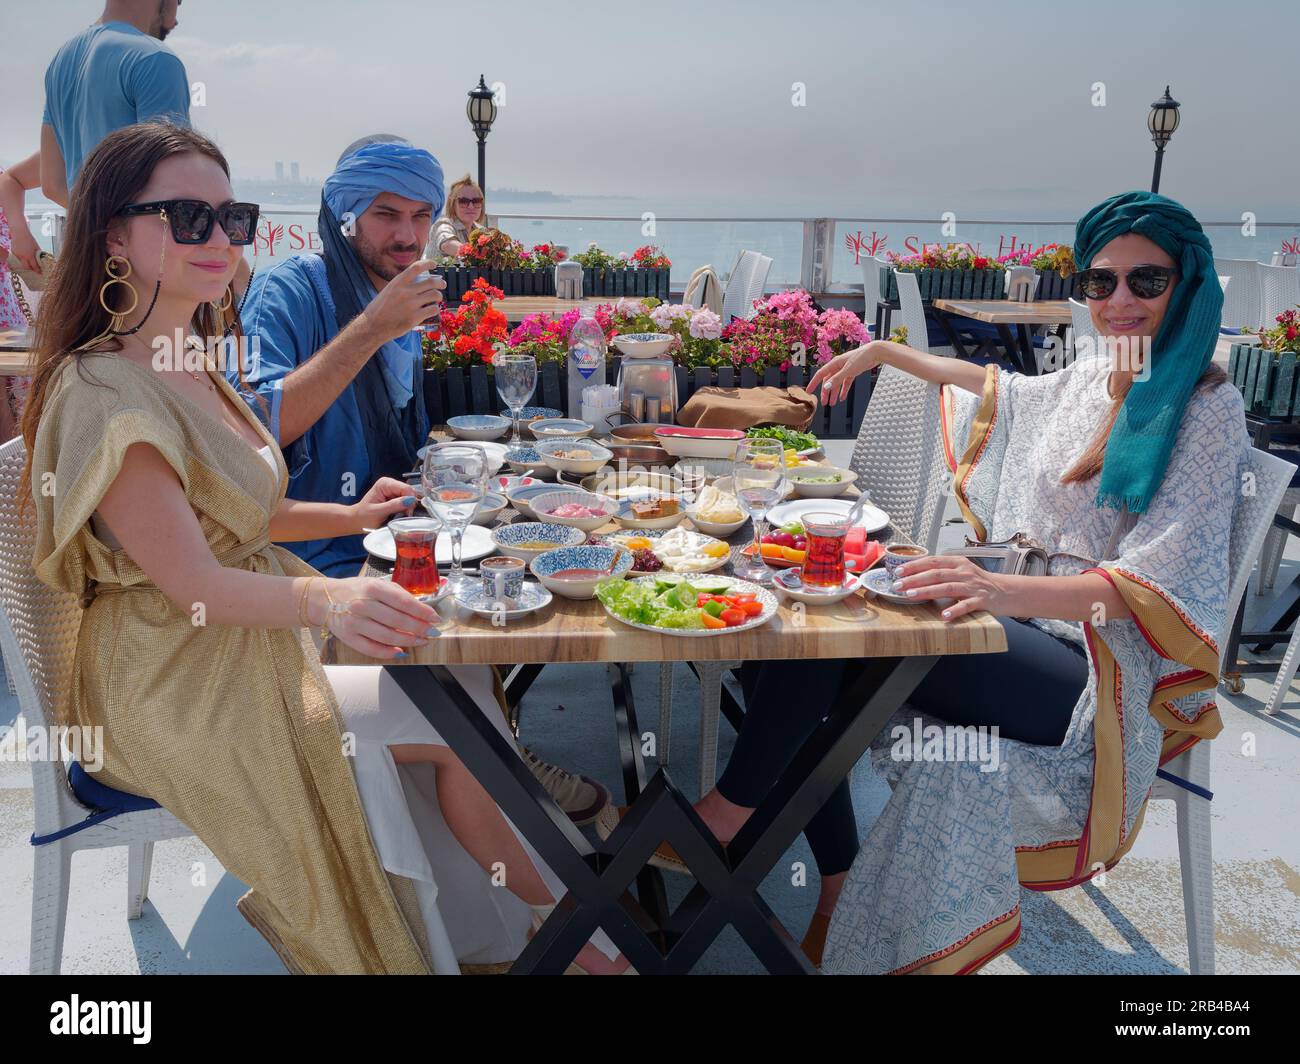 Three people enjoy a platter of food for breakfast or brunch including Turkish Tea at the Seven Hills Restaurant, Istanbul, Turkey Stock Photo